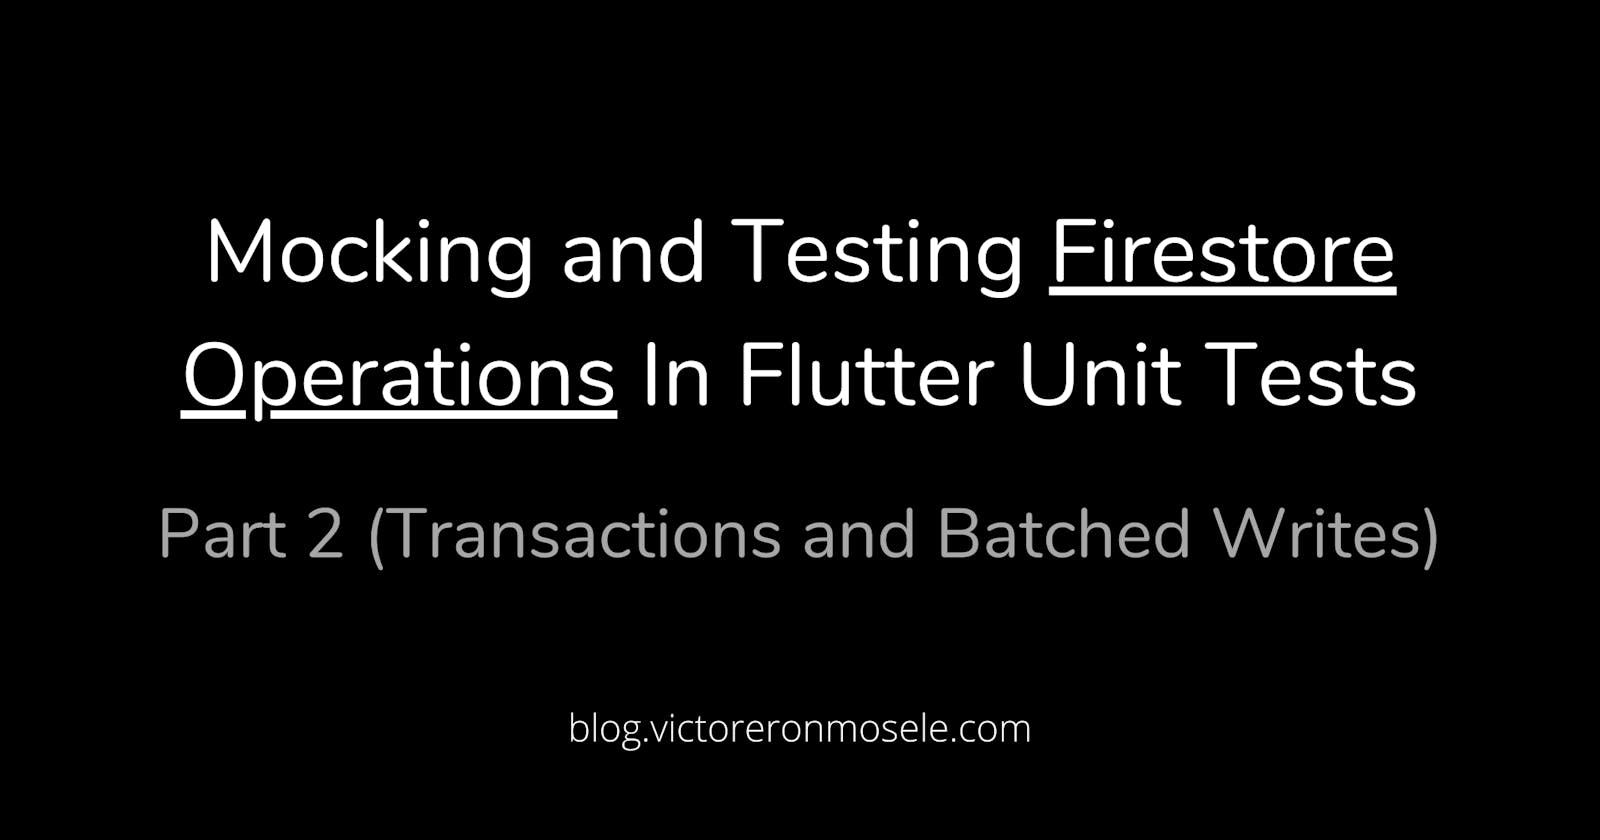 Mocking and Testing Firestore Operations in Flutter Unit Tests | Part 2 (Transactions and Batched Writes)